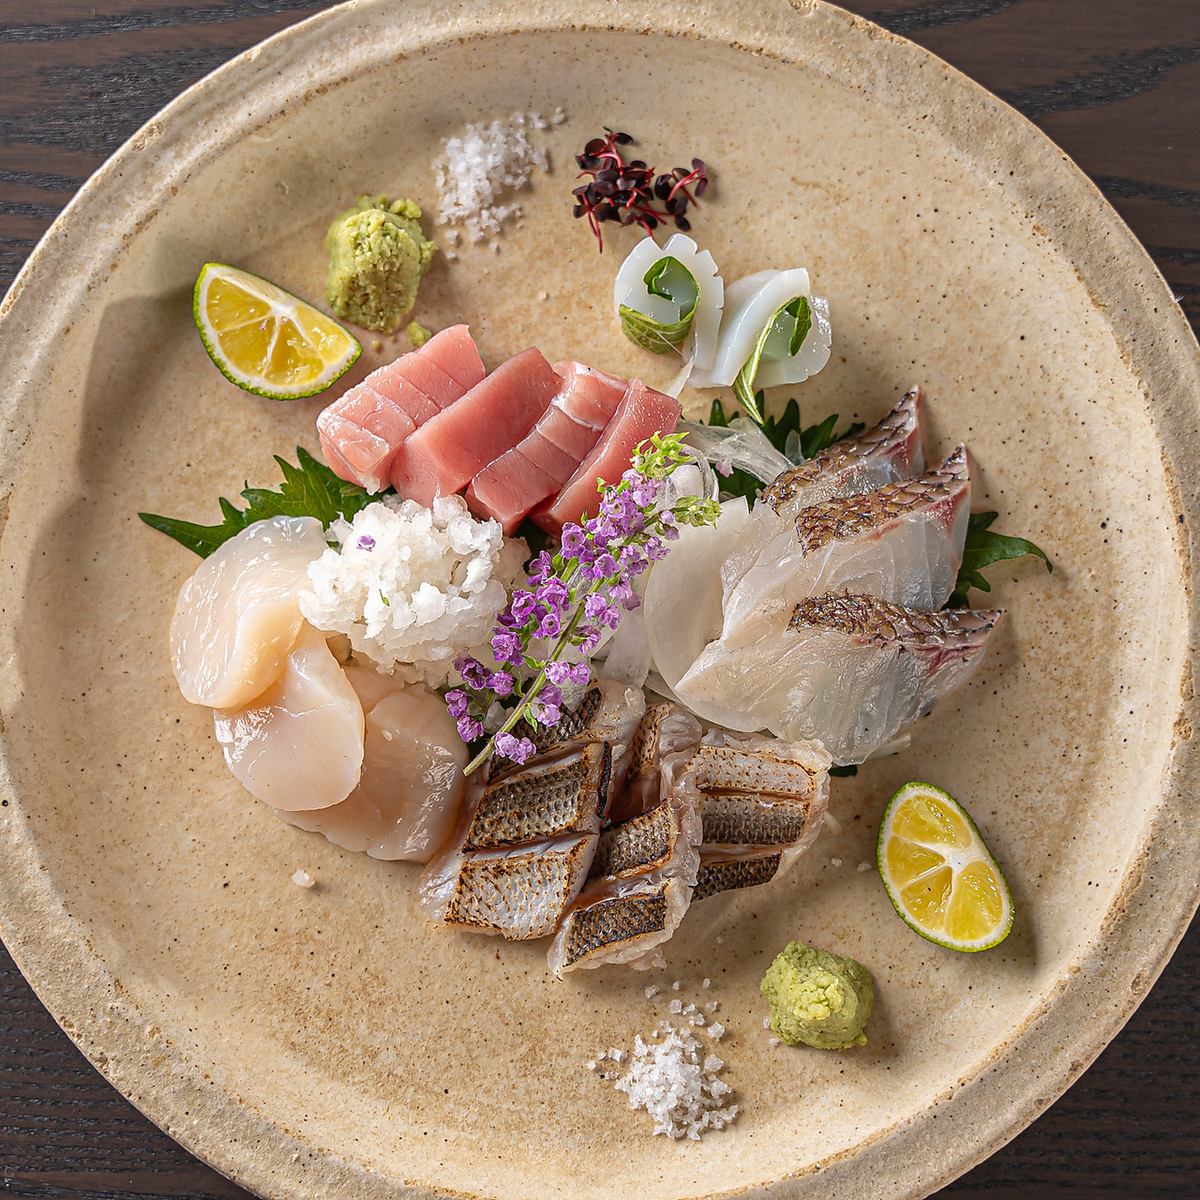 Enjoy the freshest fish selected by a connoisseur with delicious sake.